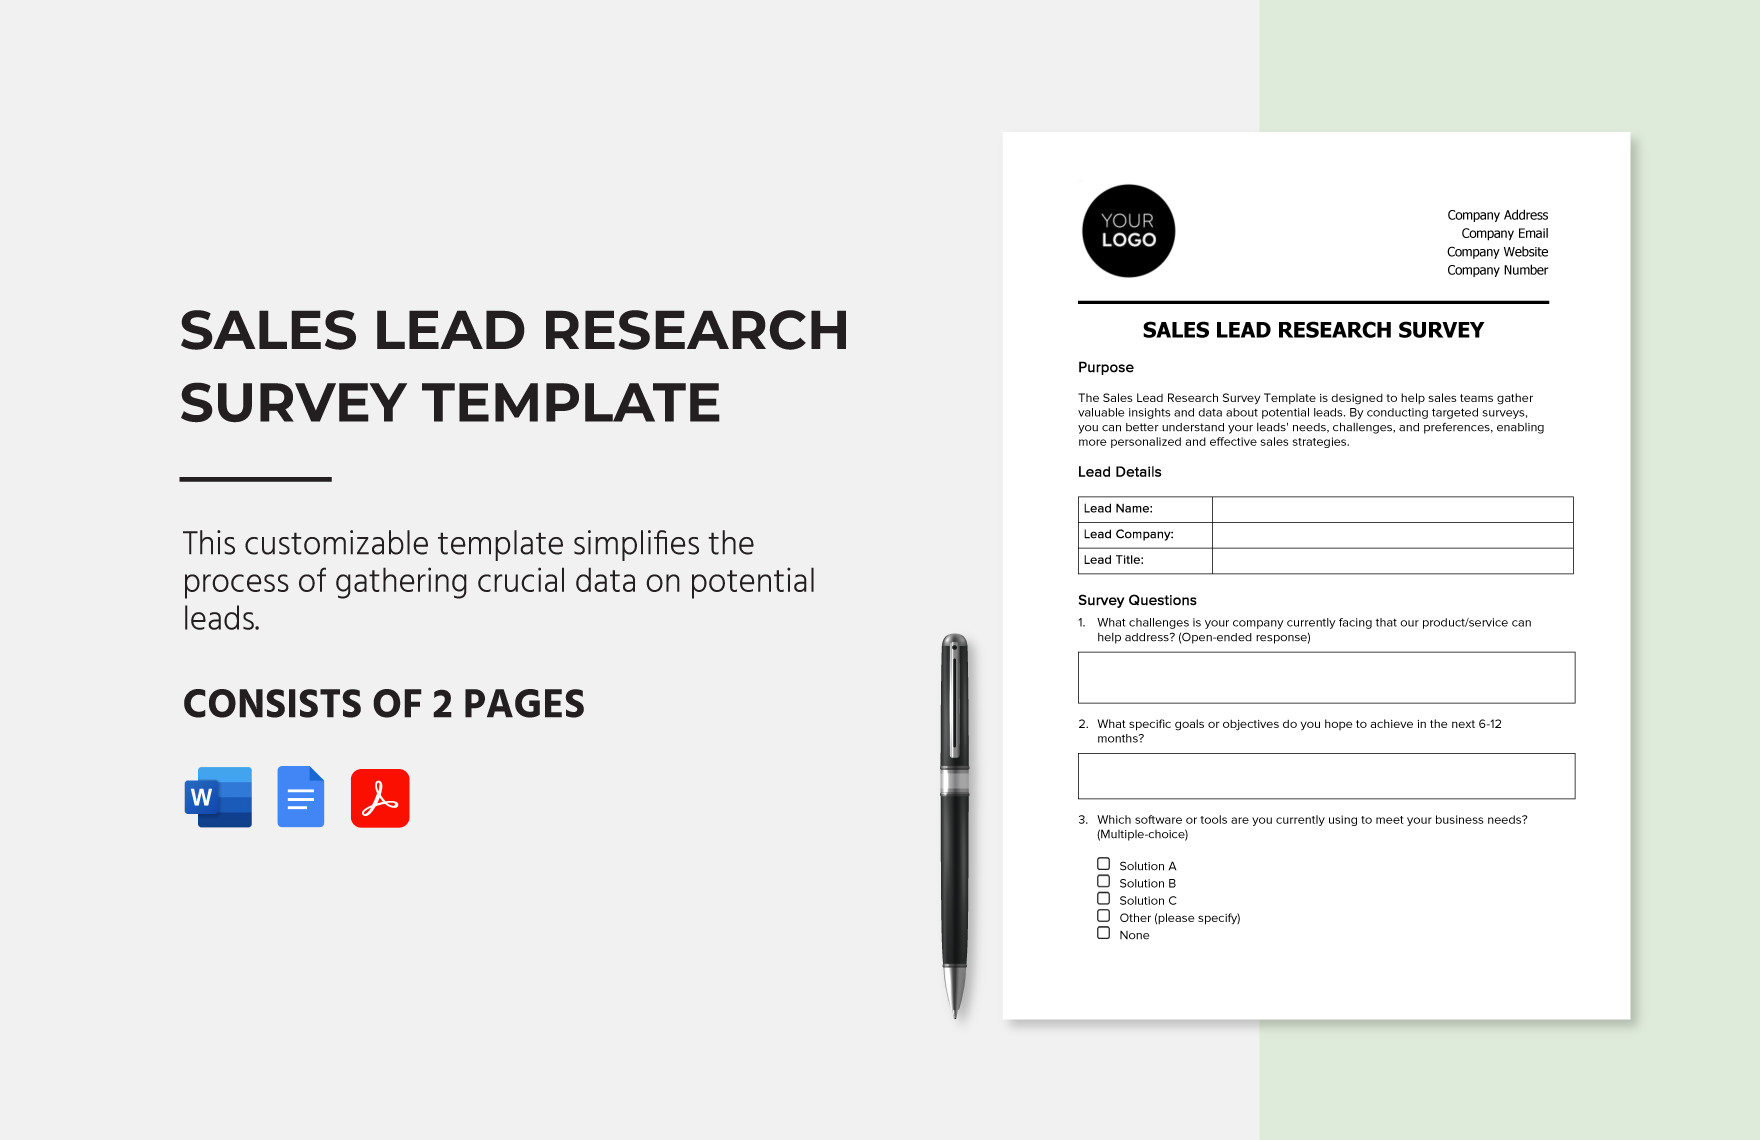 Sales Lead Research Survey Template in Word, Google Docs, PDF